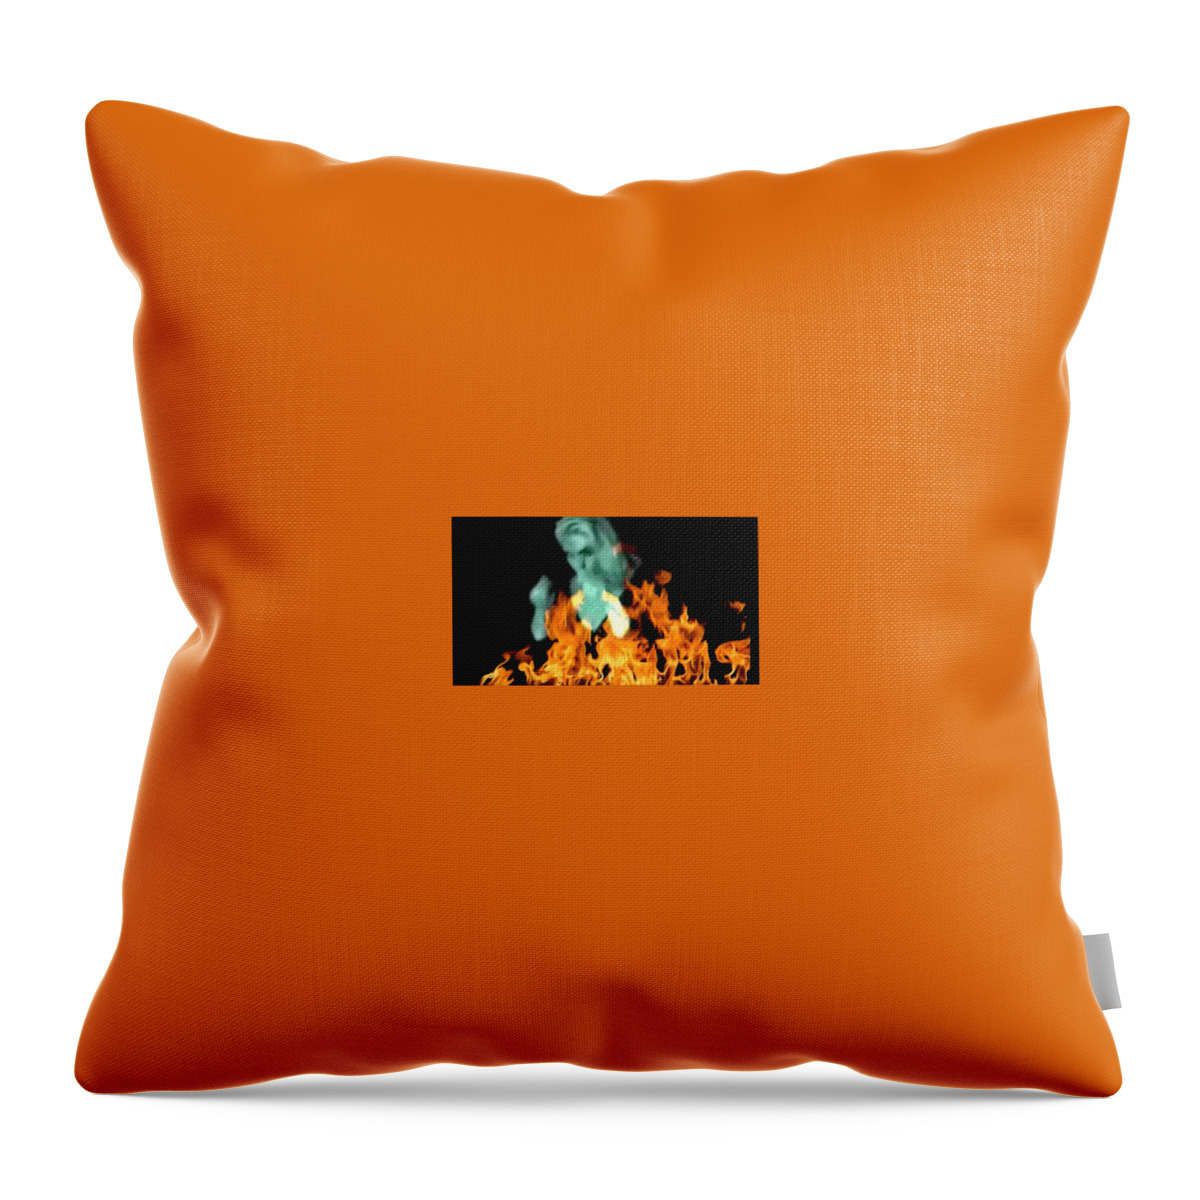  Throw Pillow featuring the photograph Fire by Dimaria Cynthia